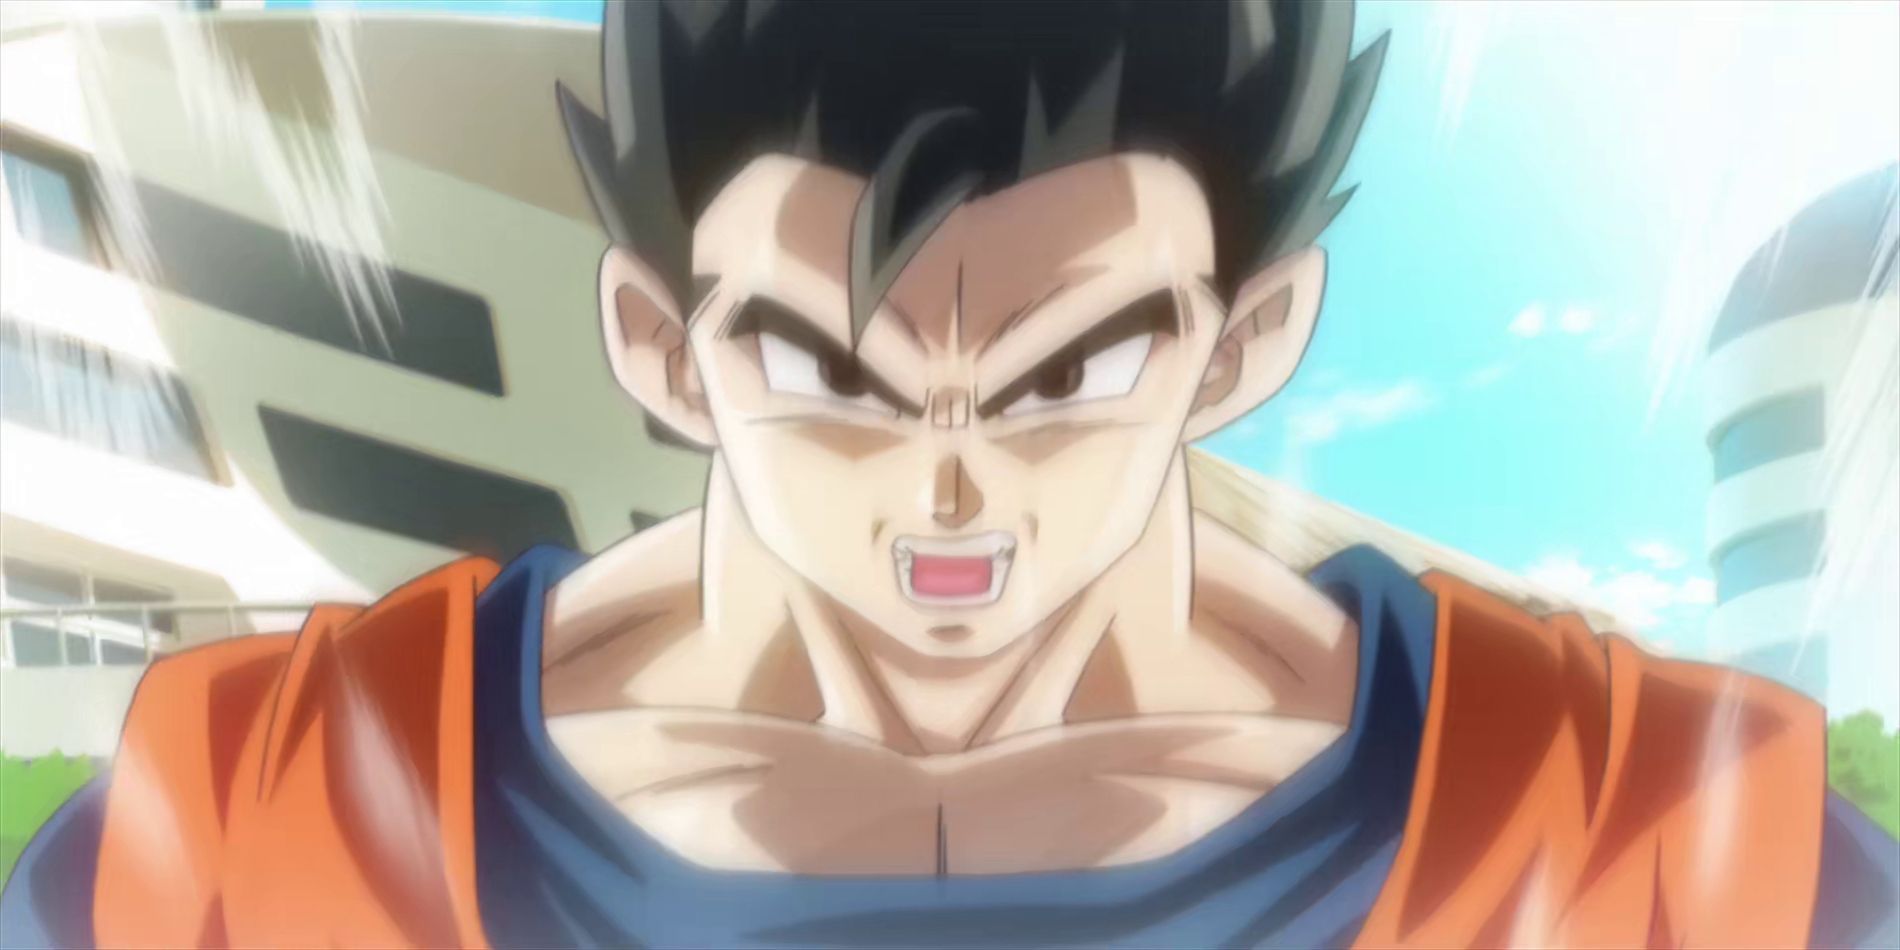 Mystic Ultimate Gohan displaying his power in Dragon Ball Super.